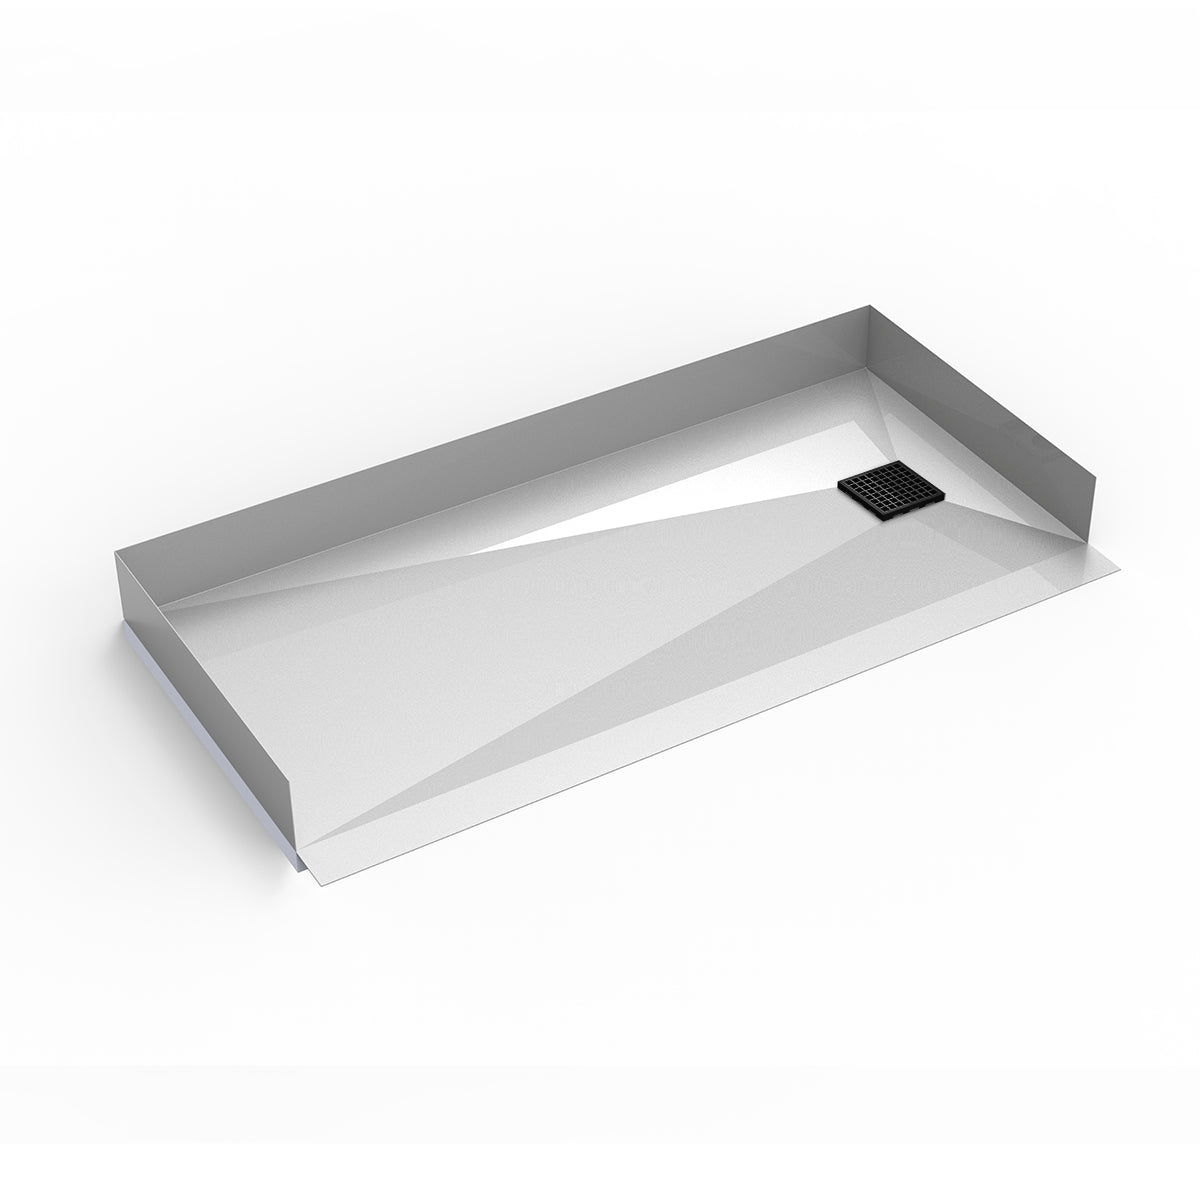 Infinity Drain 30"x 60" Curbless Stainless Steel Shower Base with Squares Pattern Right Drain location